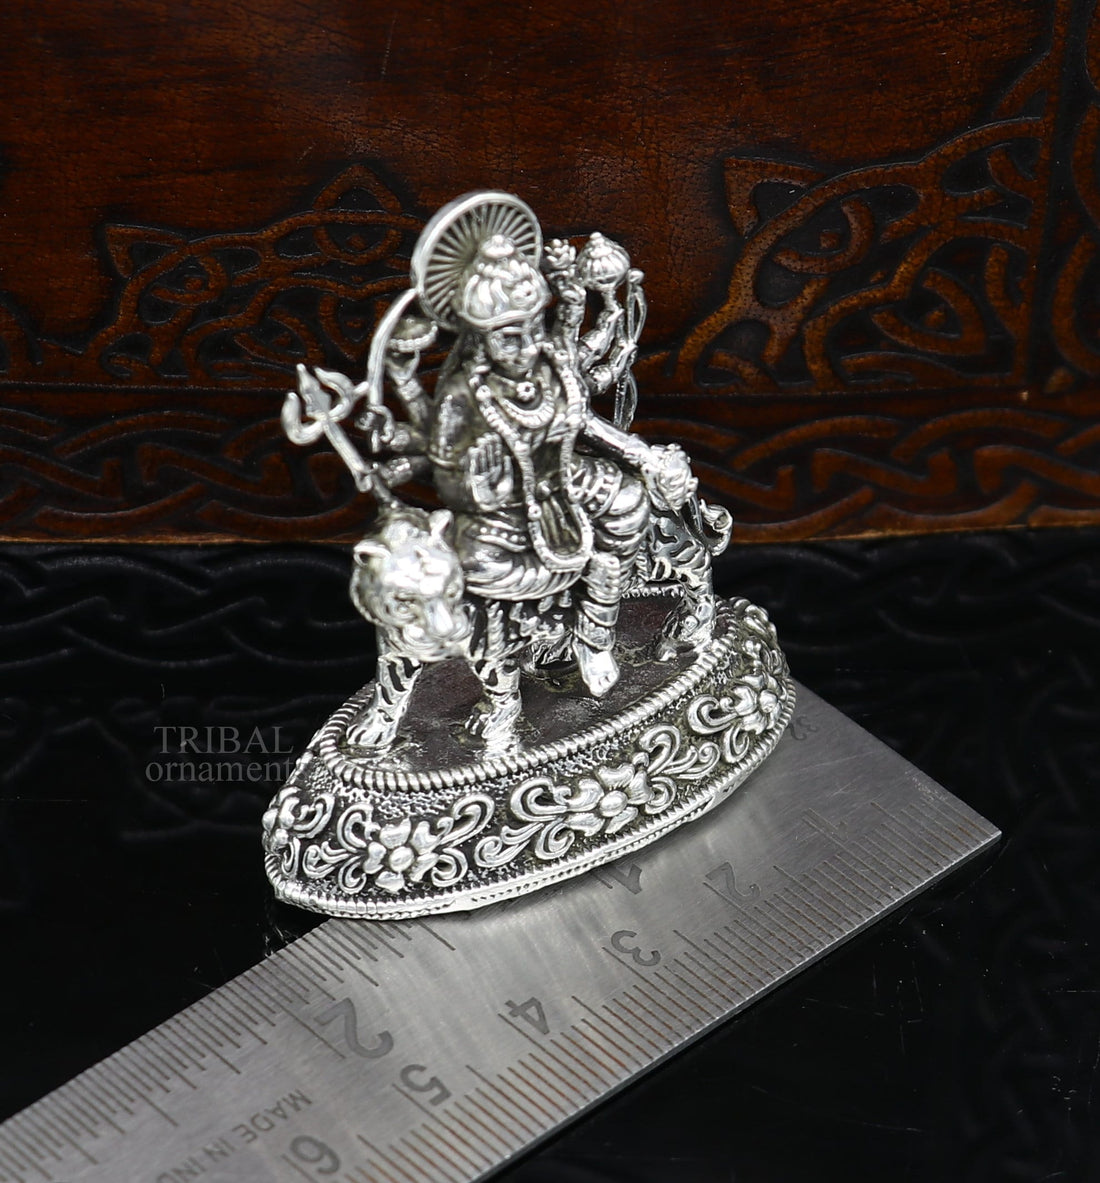 925 Sterling silver Goddess durga/bhawani maa, Pooja Articles, Silver Idols, handcrafted decorative statue sculpture amazing gifting Art488 - TRIBAL ORNAMENTS